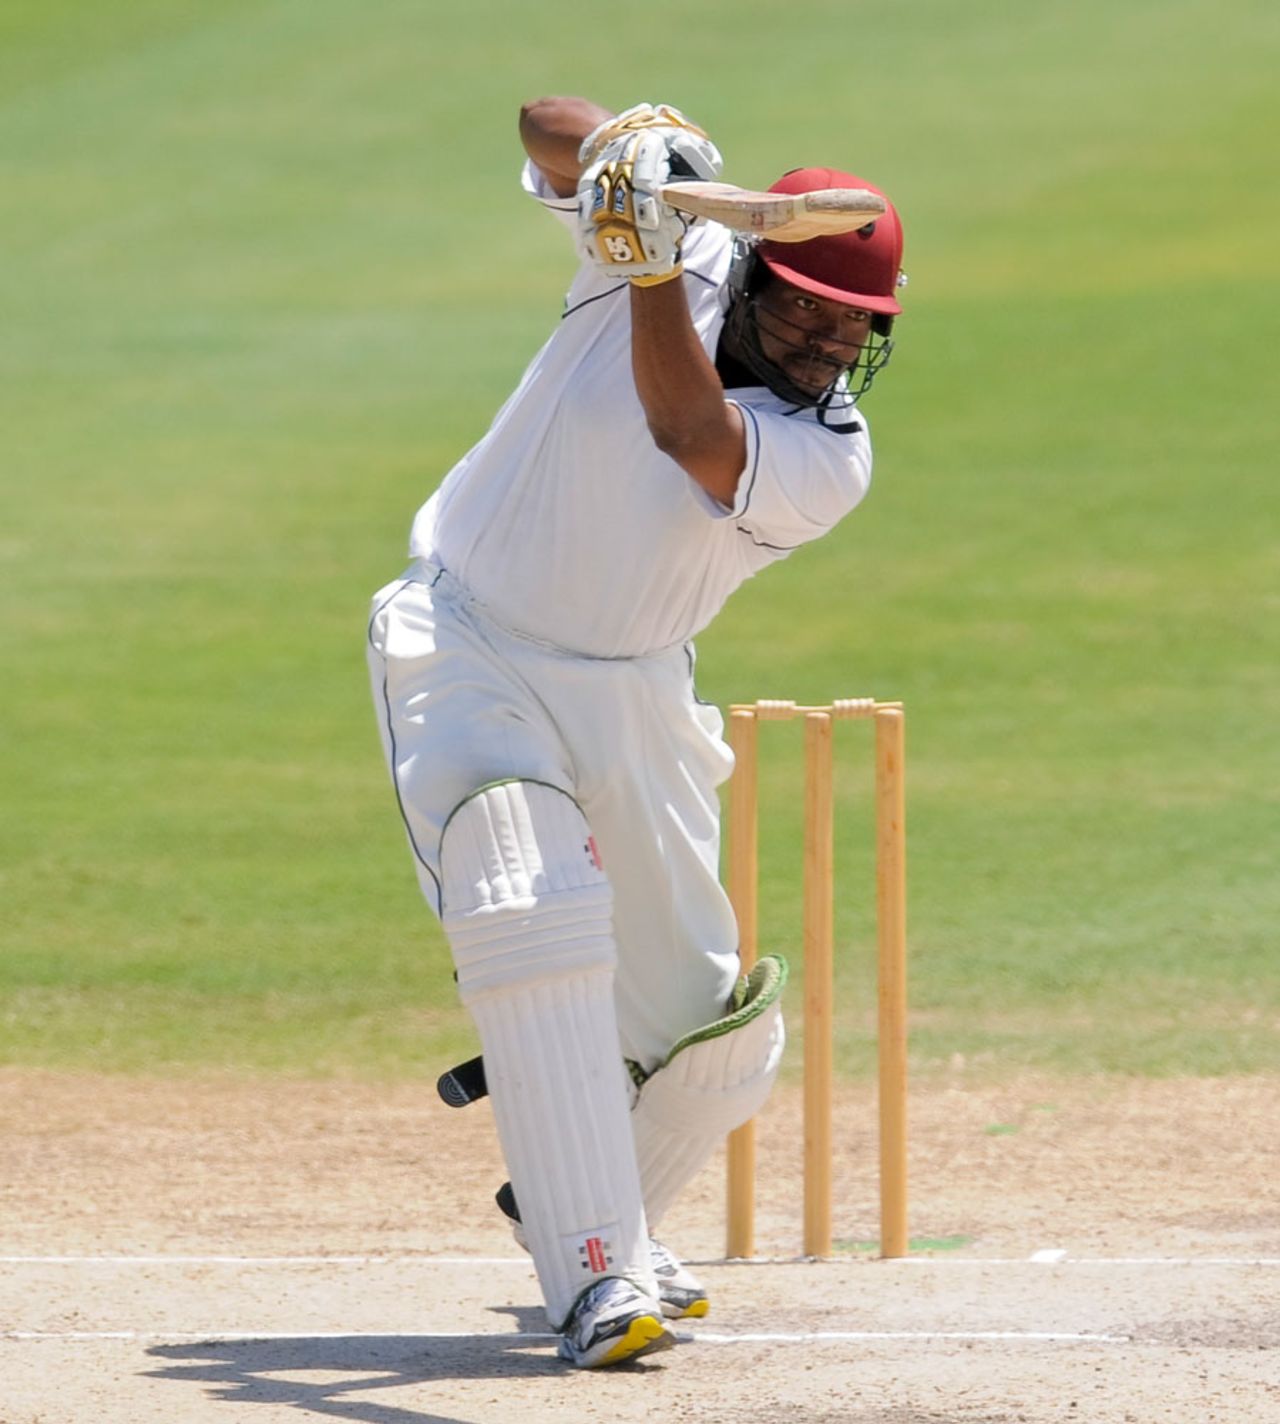 Shane Jeffers produced a stroke-filled century, St Kitts & Nevis v Bangladeshis, tour game, 2nd day, St Kitts, August 31, 2014